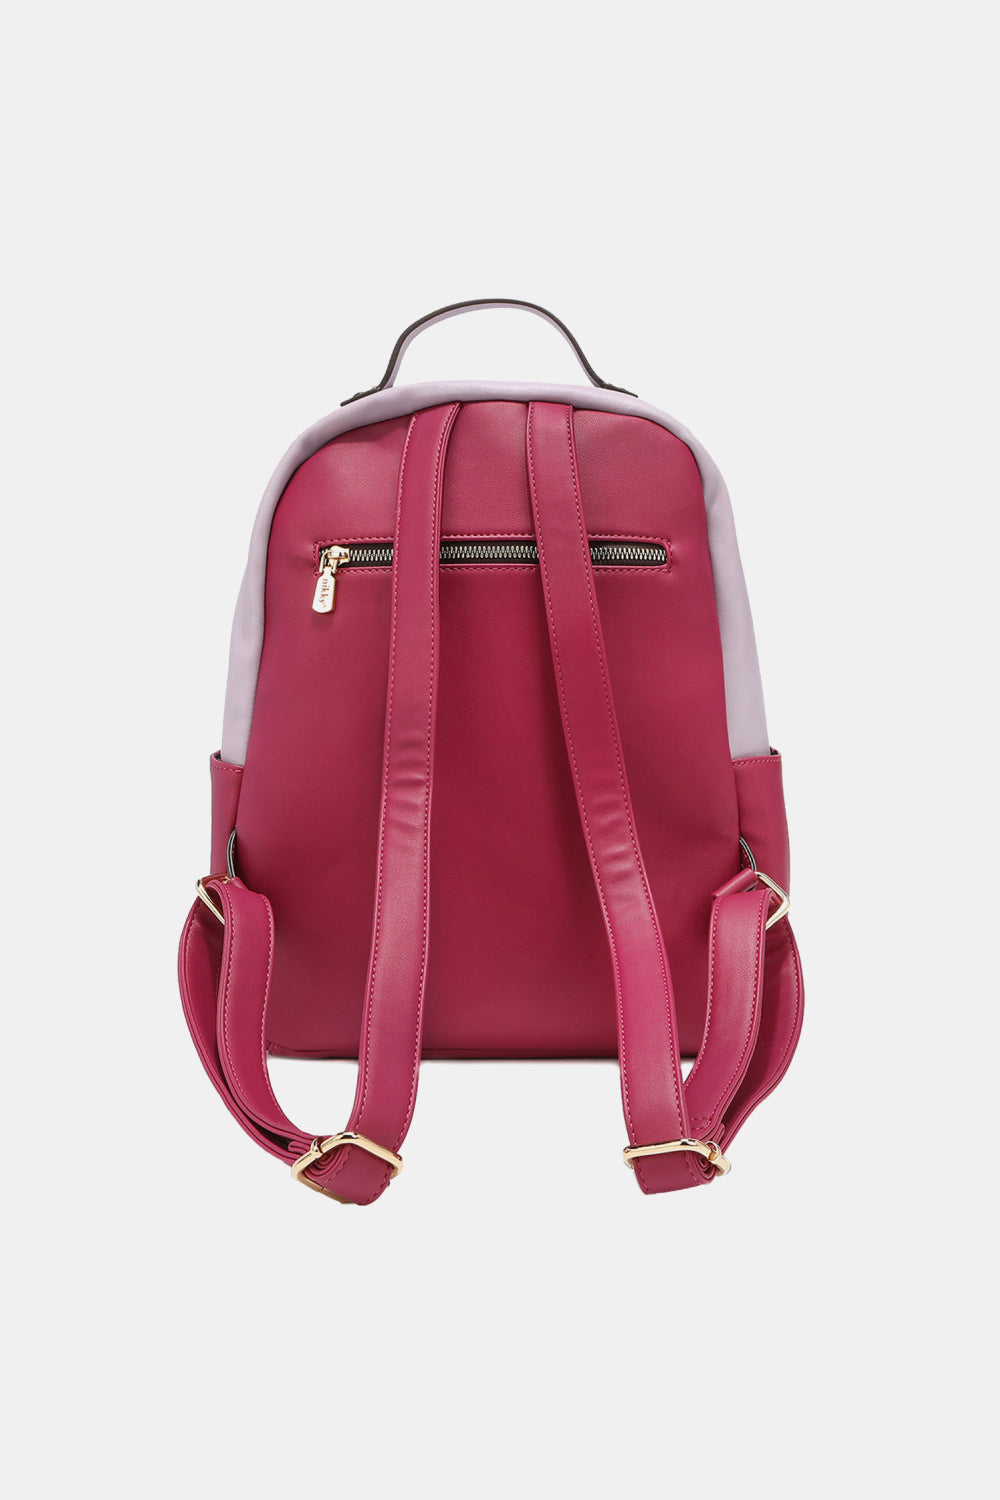 Nicole Lee USA Nikky Fashion Backpack free shipping -Oh Em Gee Boutique